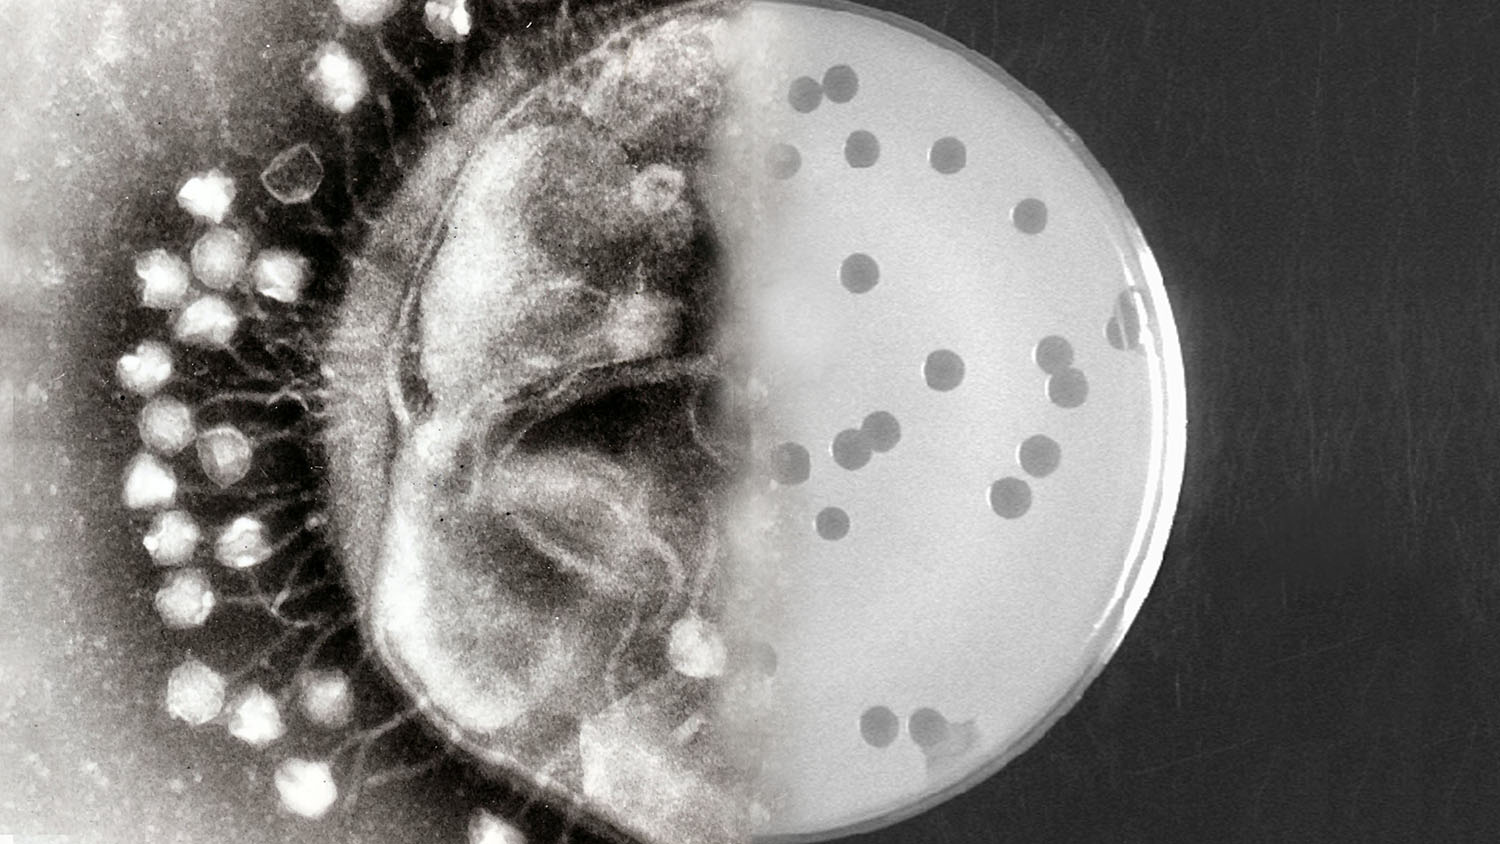 Bacteriophages at different levels of magnification (attached to bacterial cell wall/in petri dish).